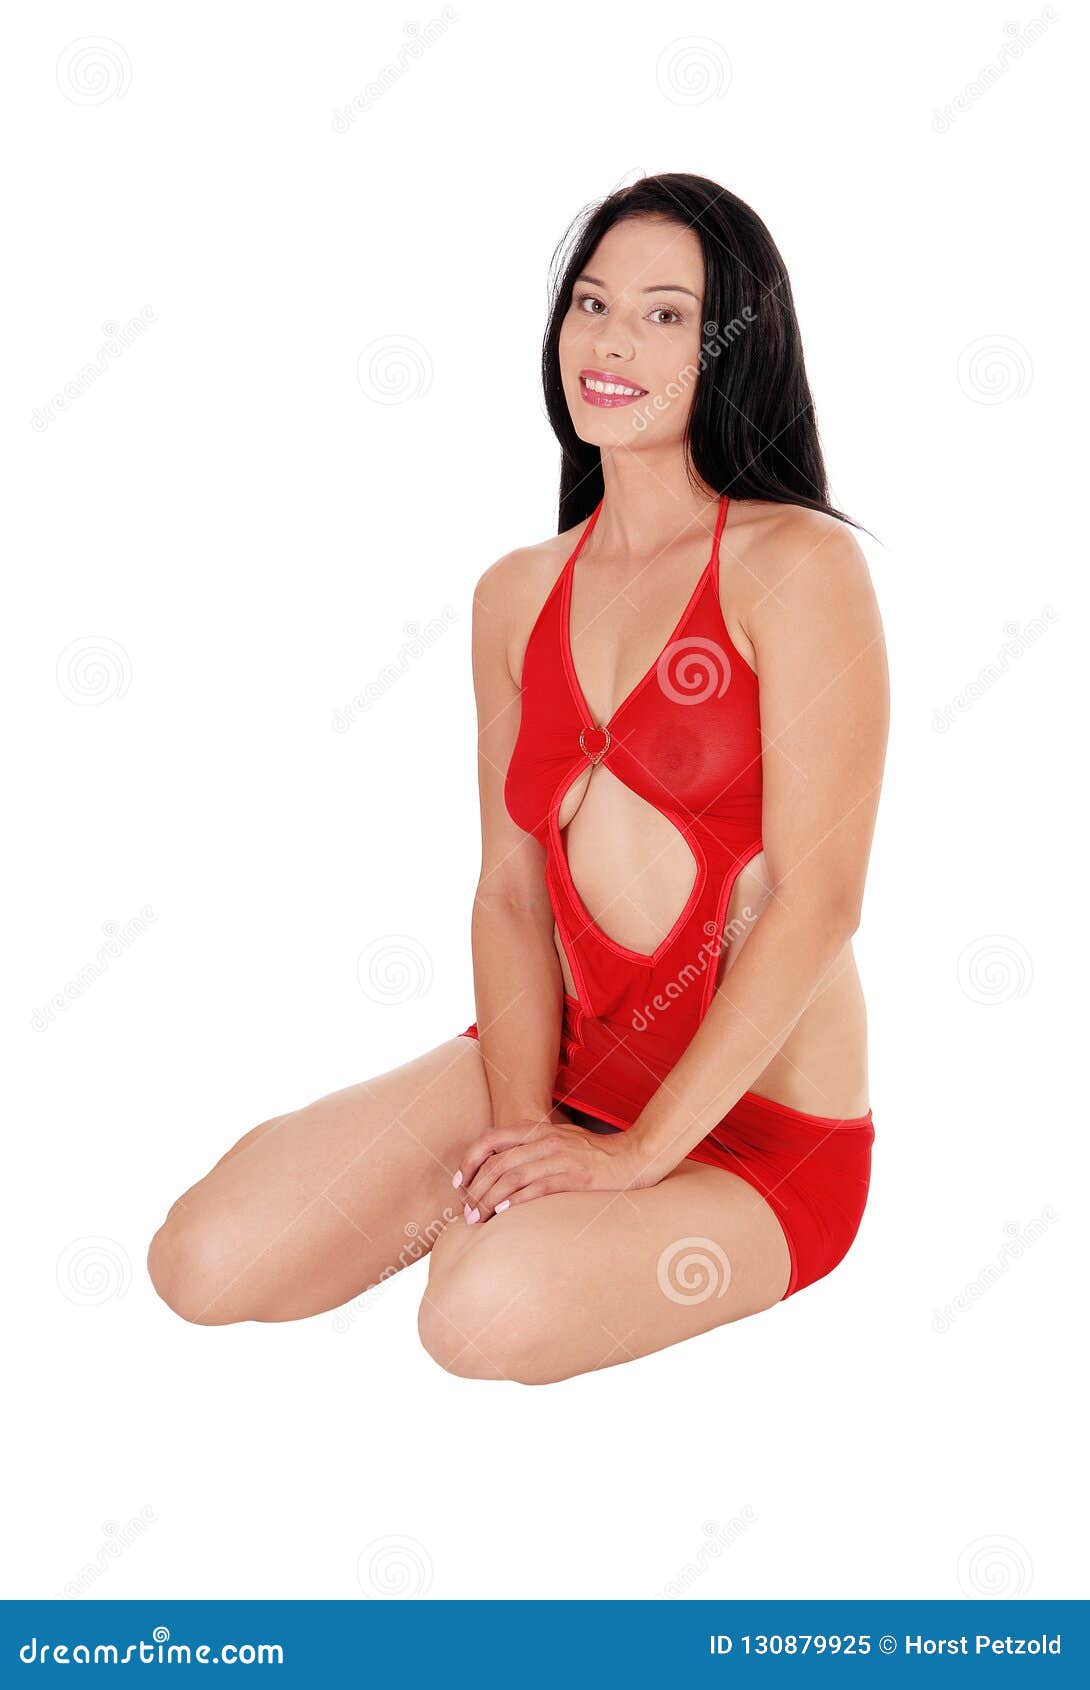 Lady in red lingerie